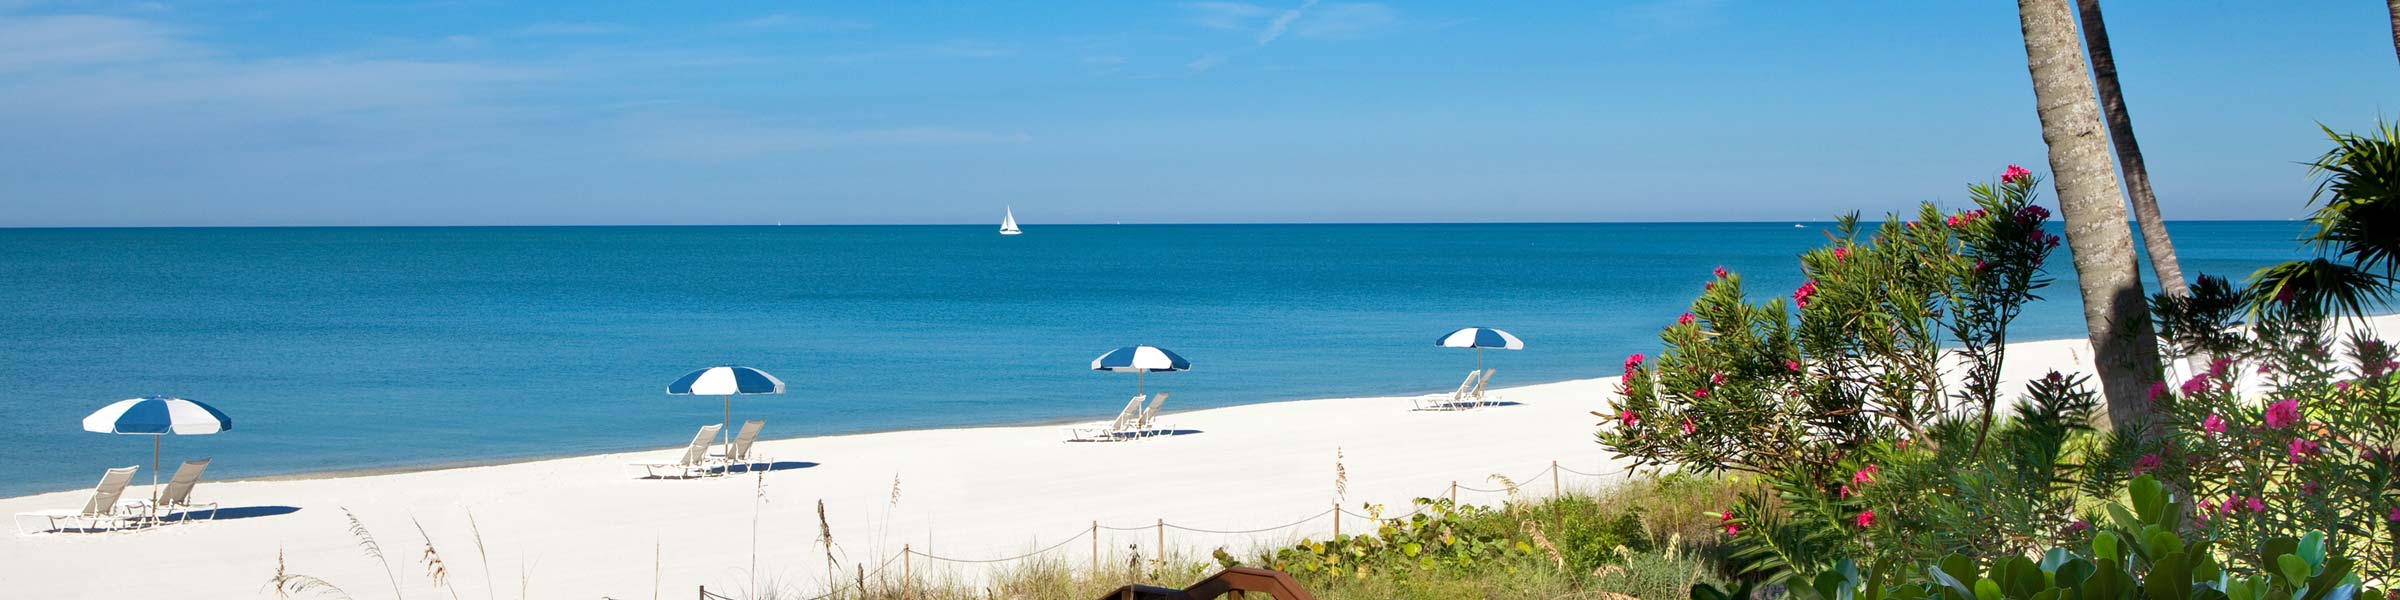 Beach view with lounge chairs and umbrellas in Naples, FL